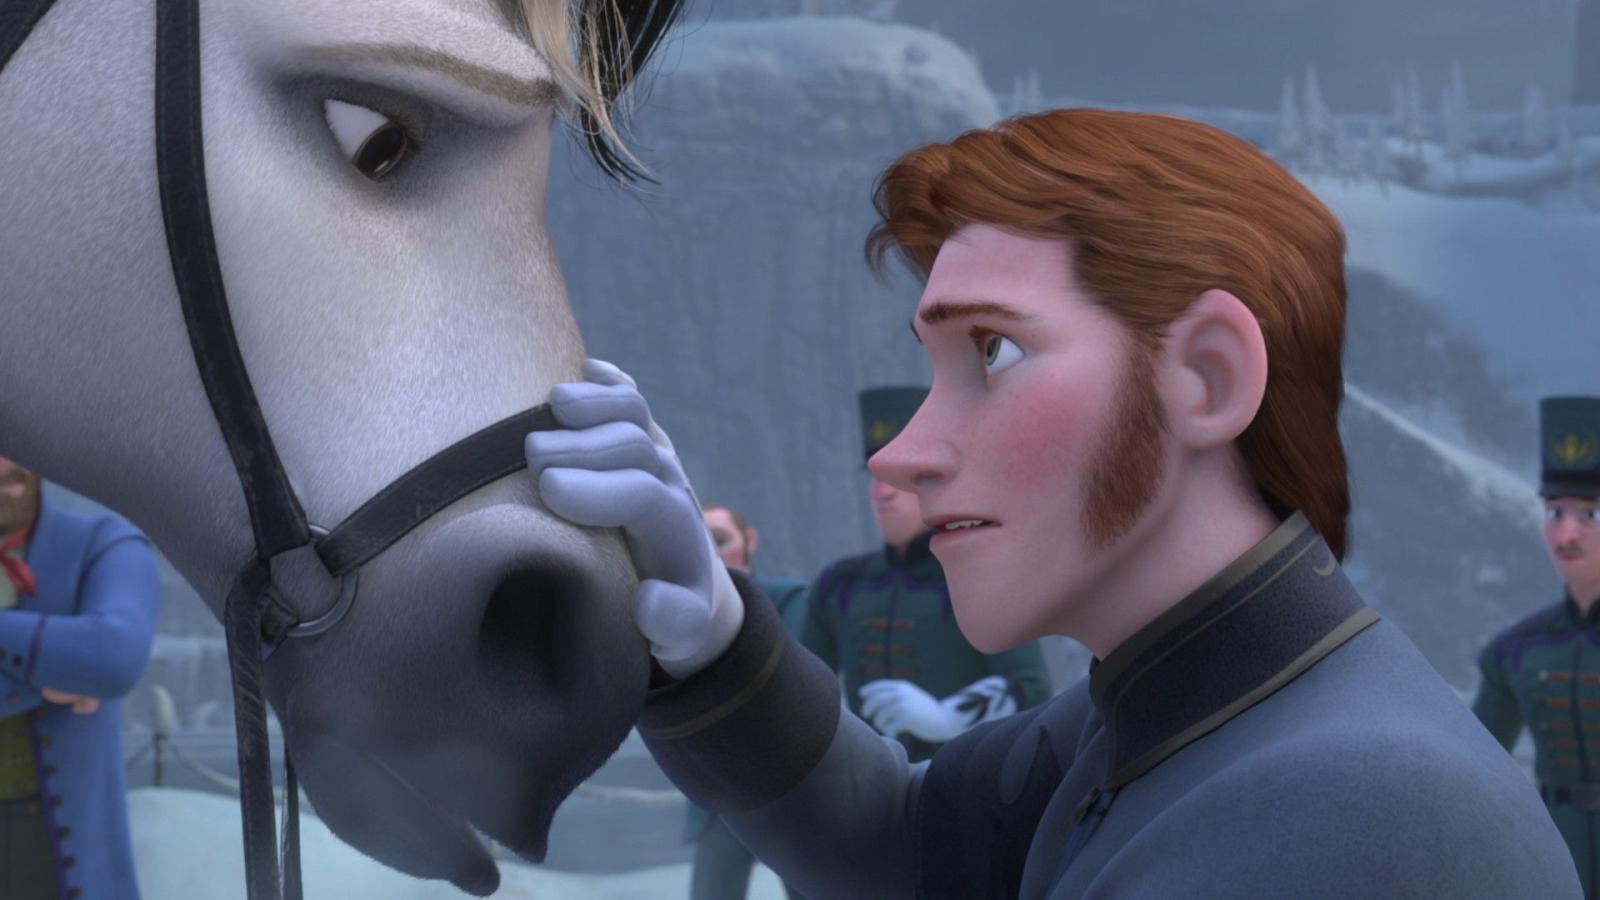 Disney's First Script For Frozen Missed the Mark So Badly It Would Bury the Franchise - image 1